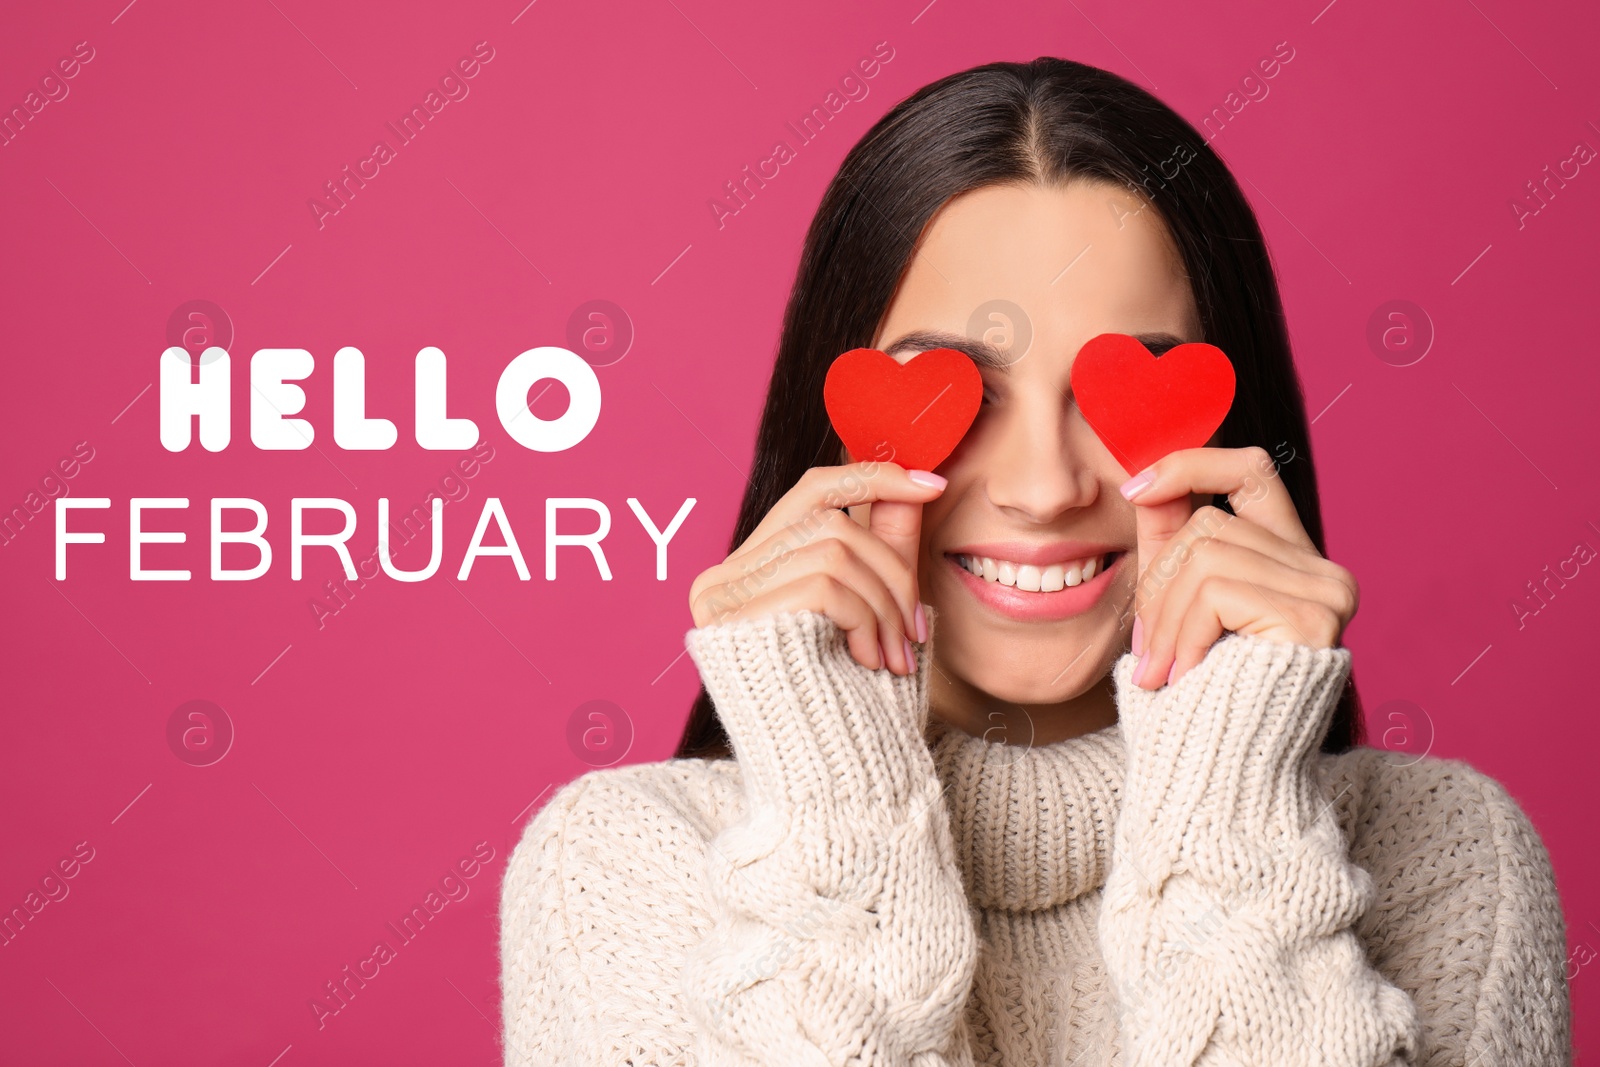 Image of Greeting card with text Hello February. Young woman holding paper hearts near eyes on pink background